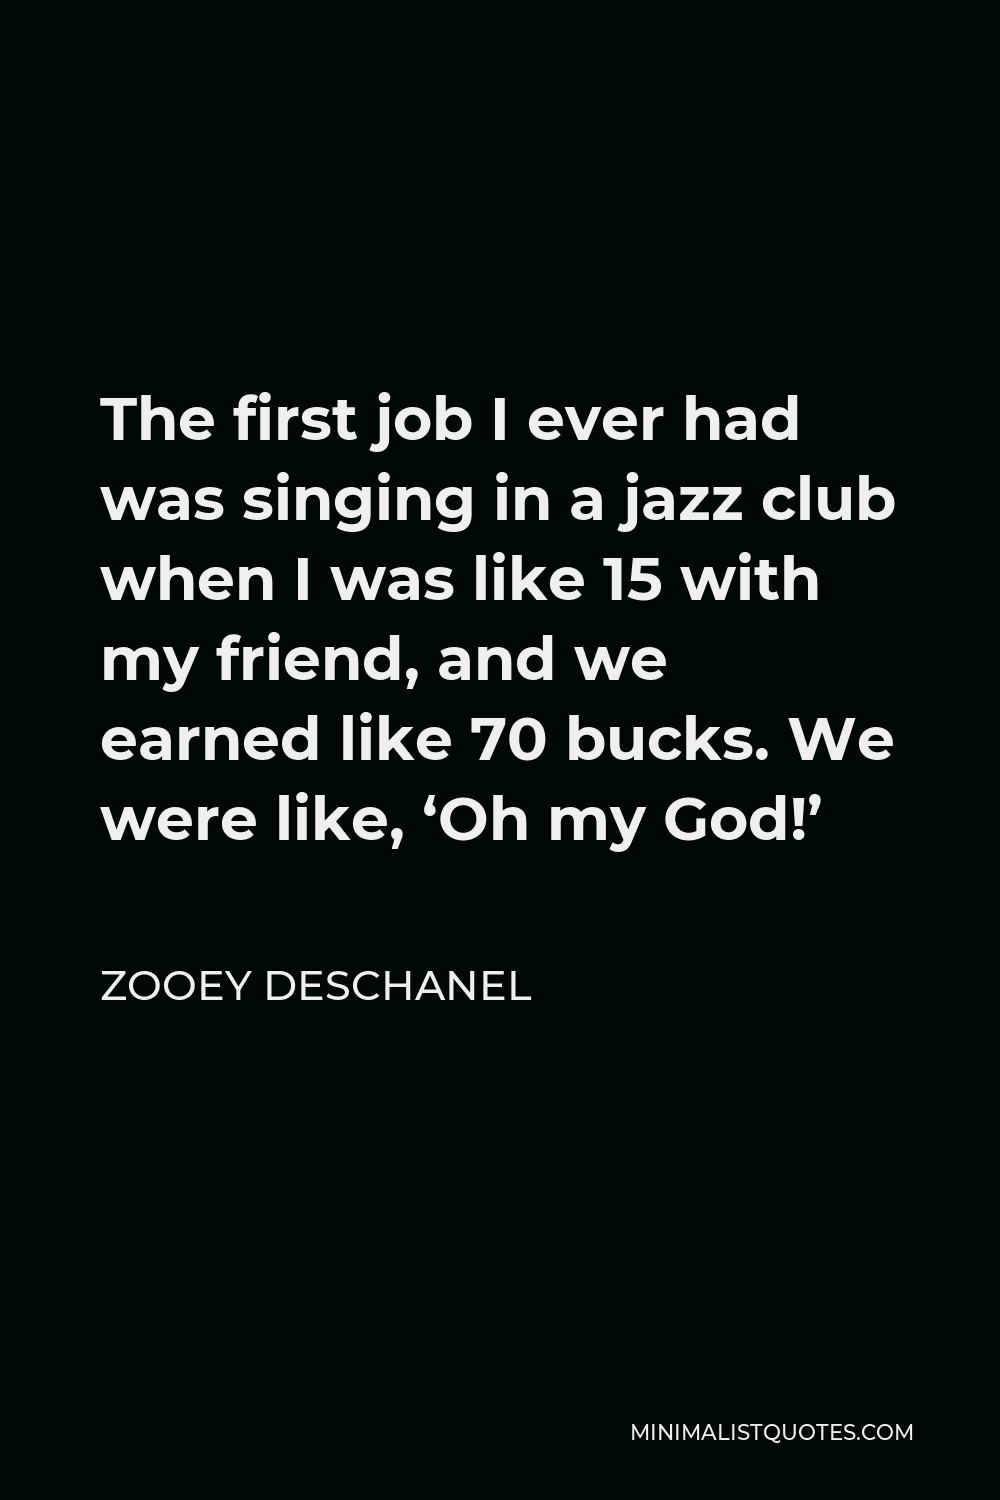 Zooey Deschanel Quote - The first job I ever had was singing in a jazz club when I was like 15 with my friend, and we earned like 70 bucks. We were like, ‘Oh my God!’